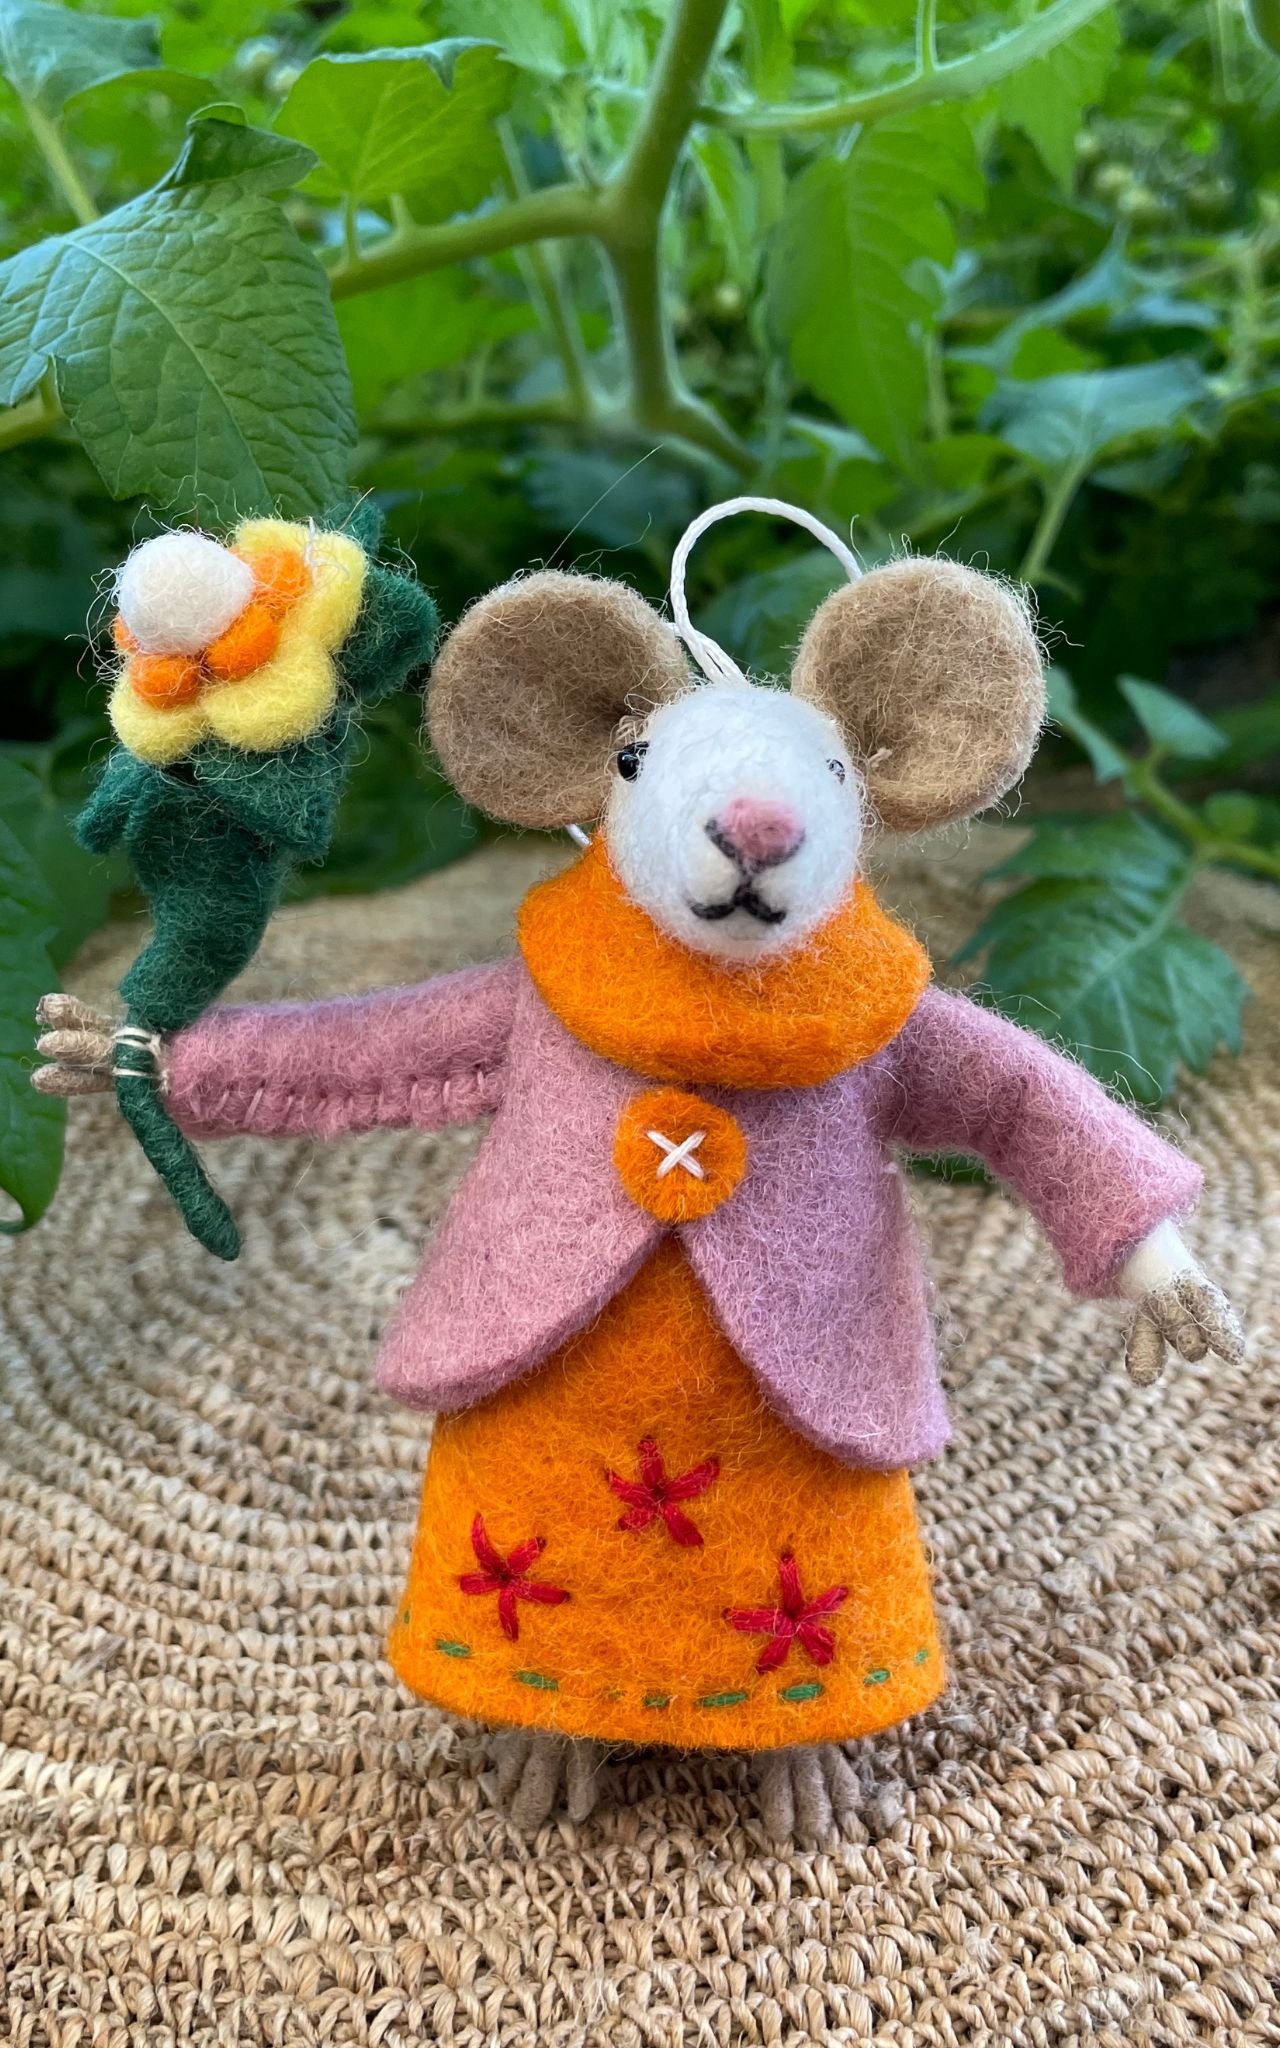 Surya Australia Ethical Wool Felt Mouse Toys made in Nepal - Brought you Flowers